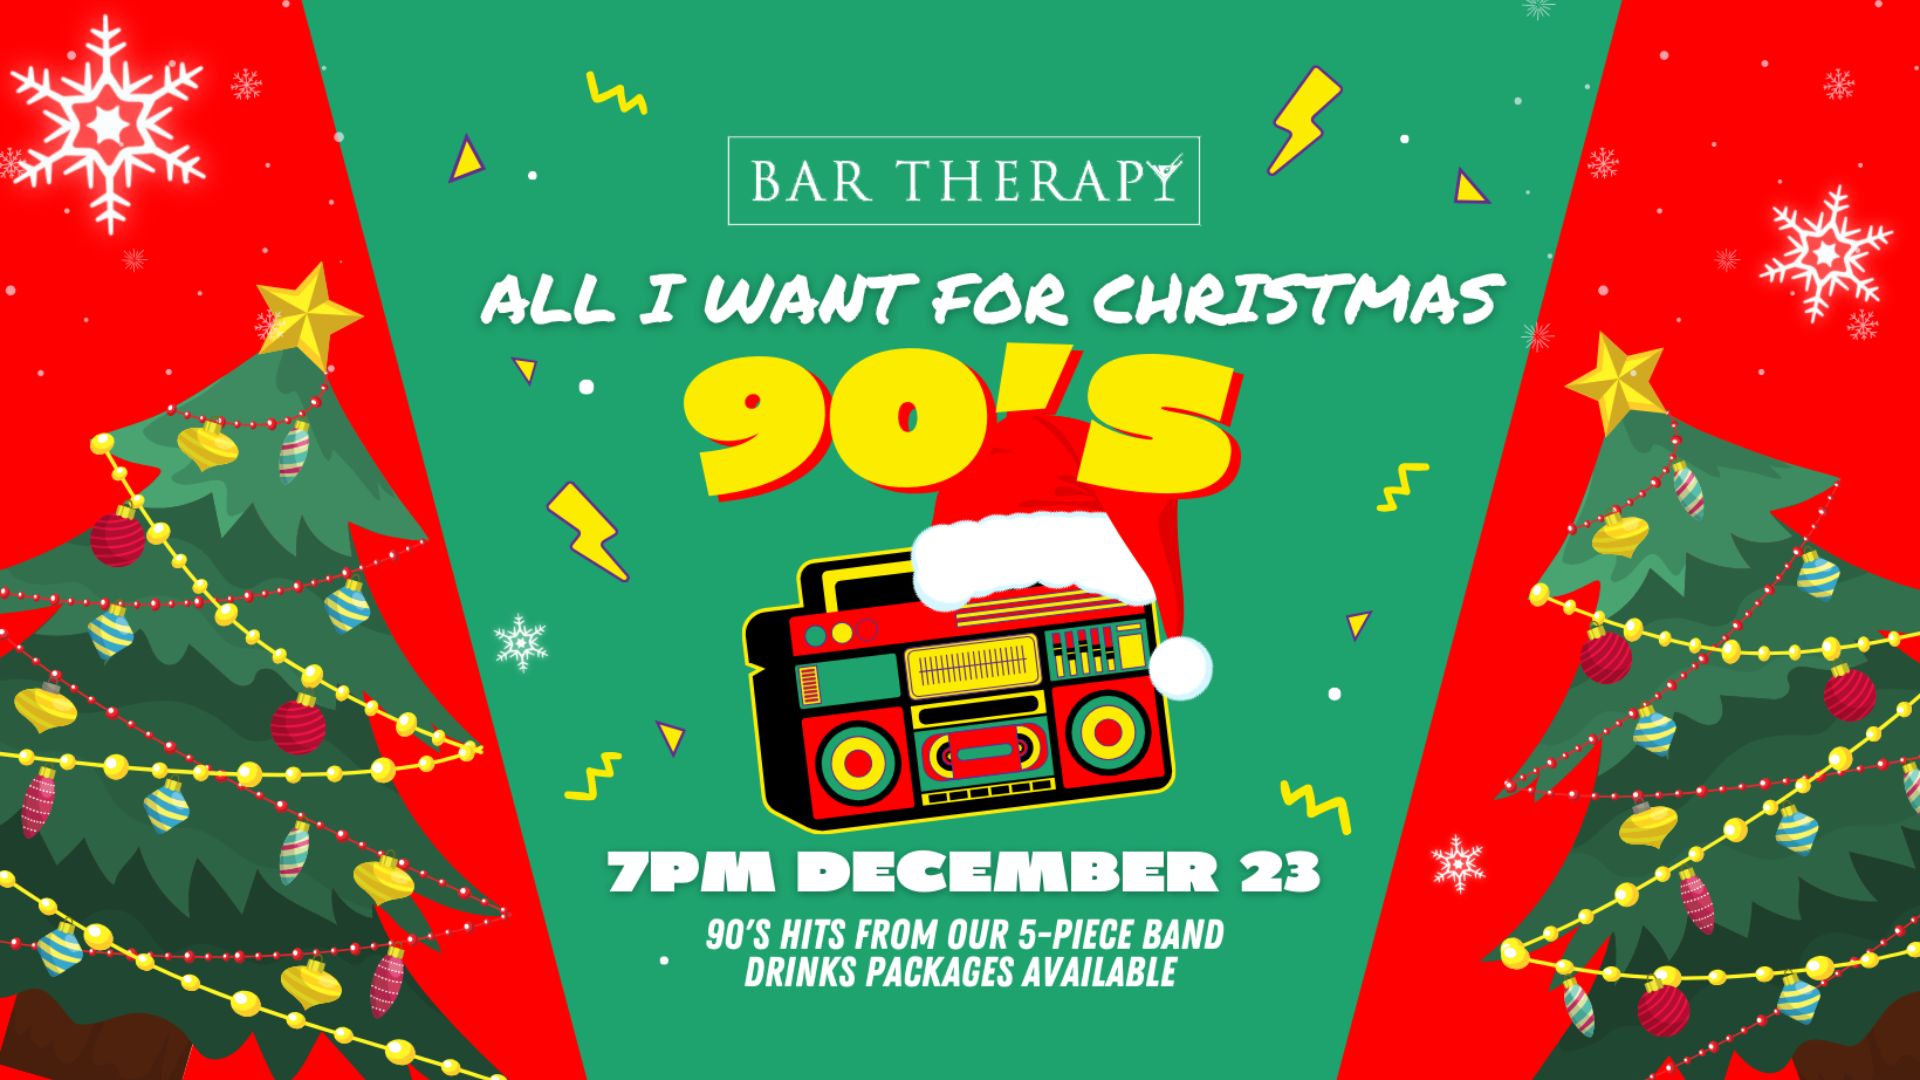 Bar Therapy Mandurah - All I want for Christmas 90s party